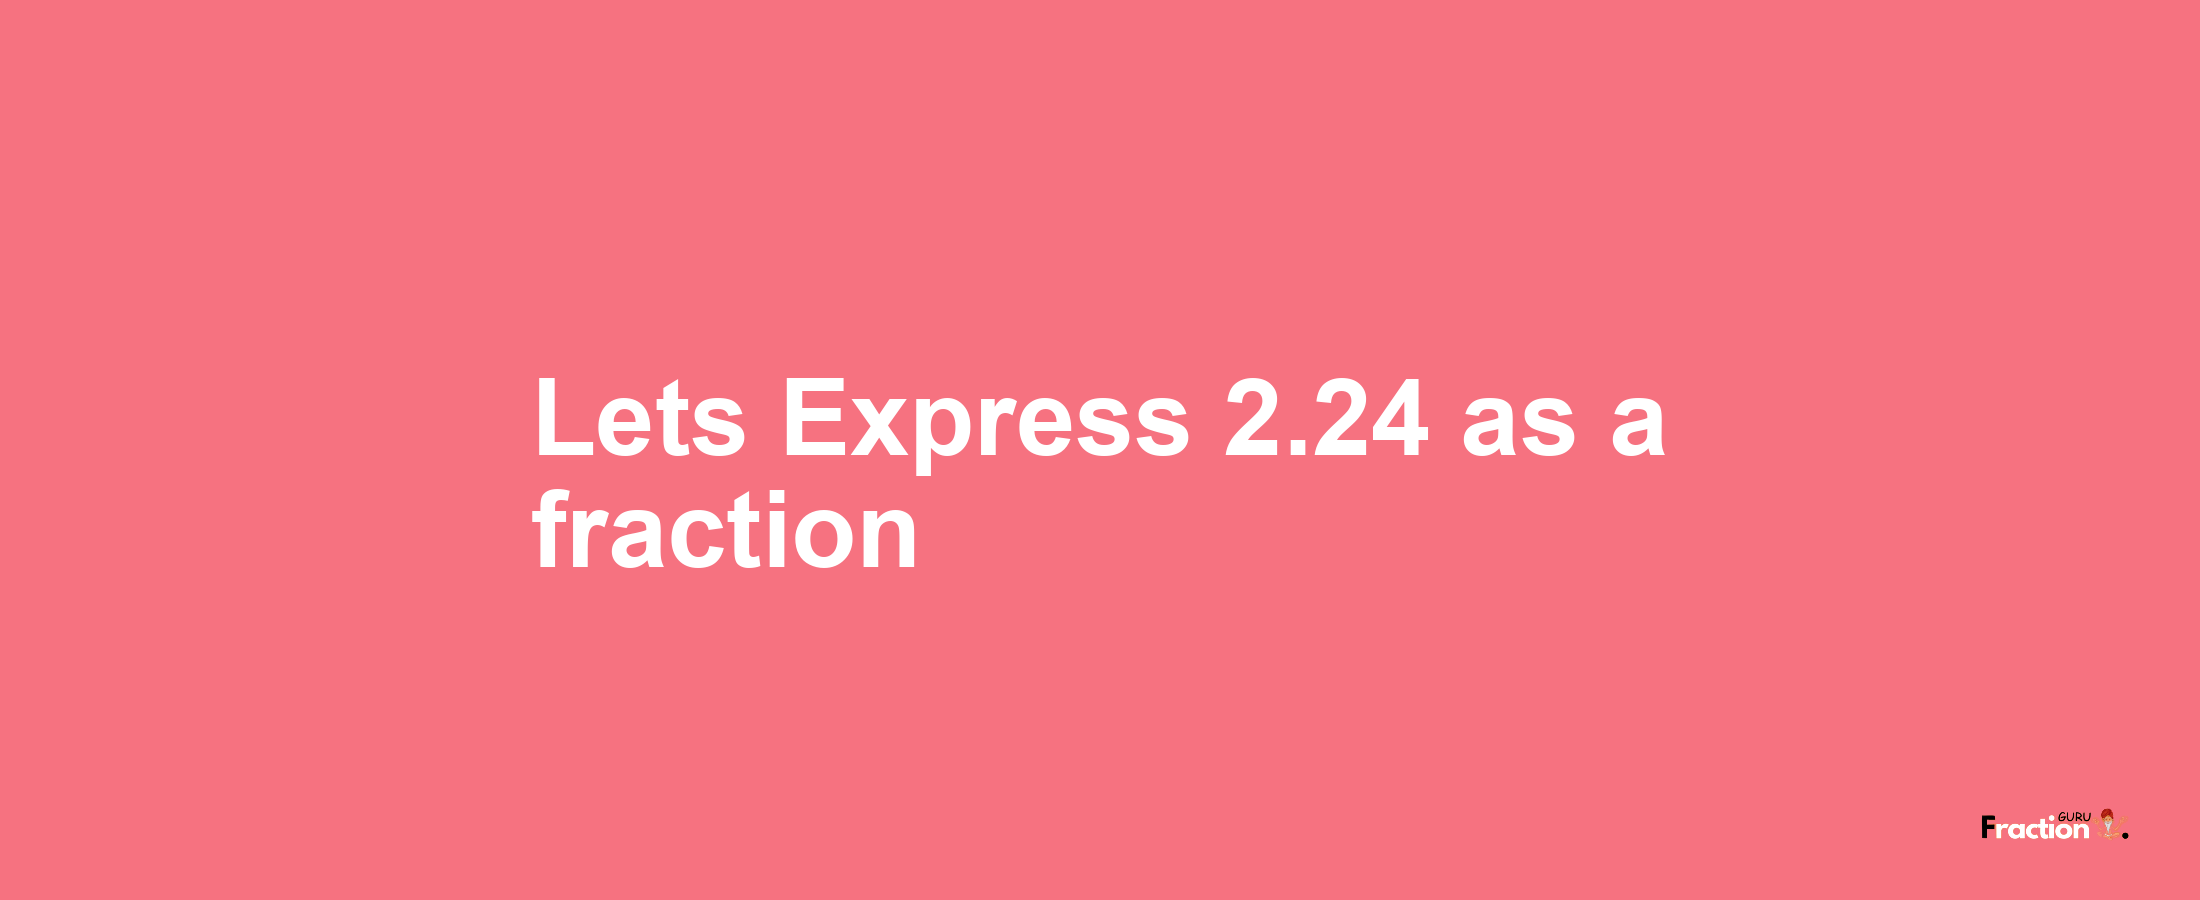 Lets Express 2.24 as afraction